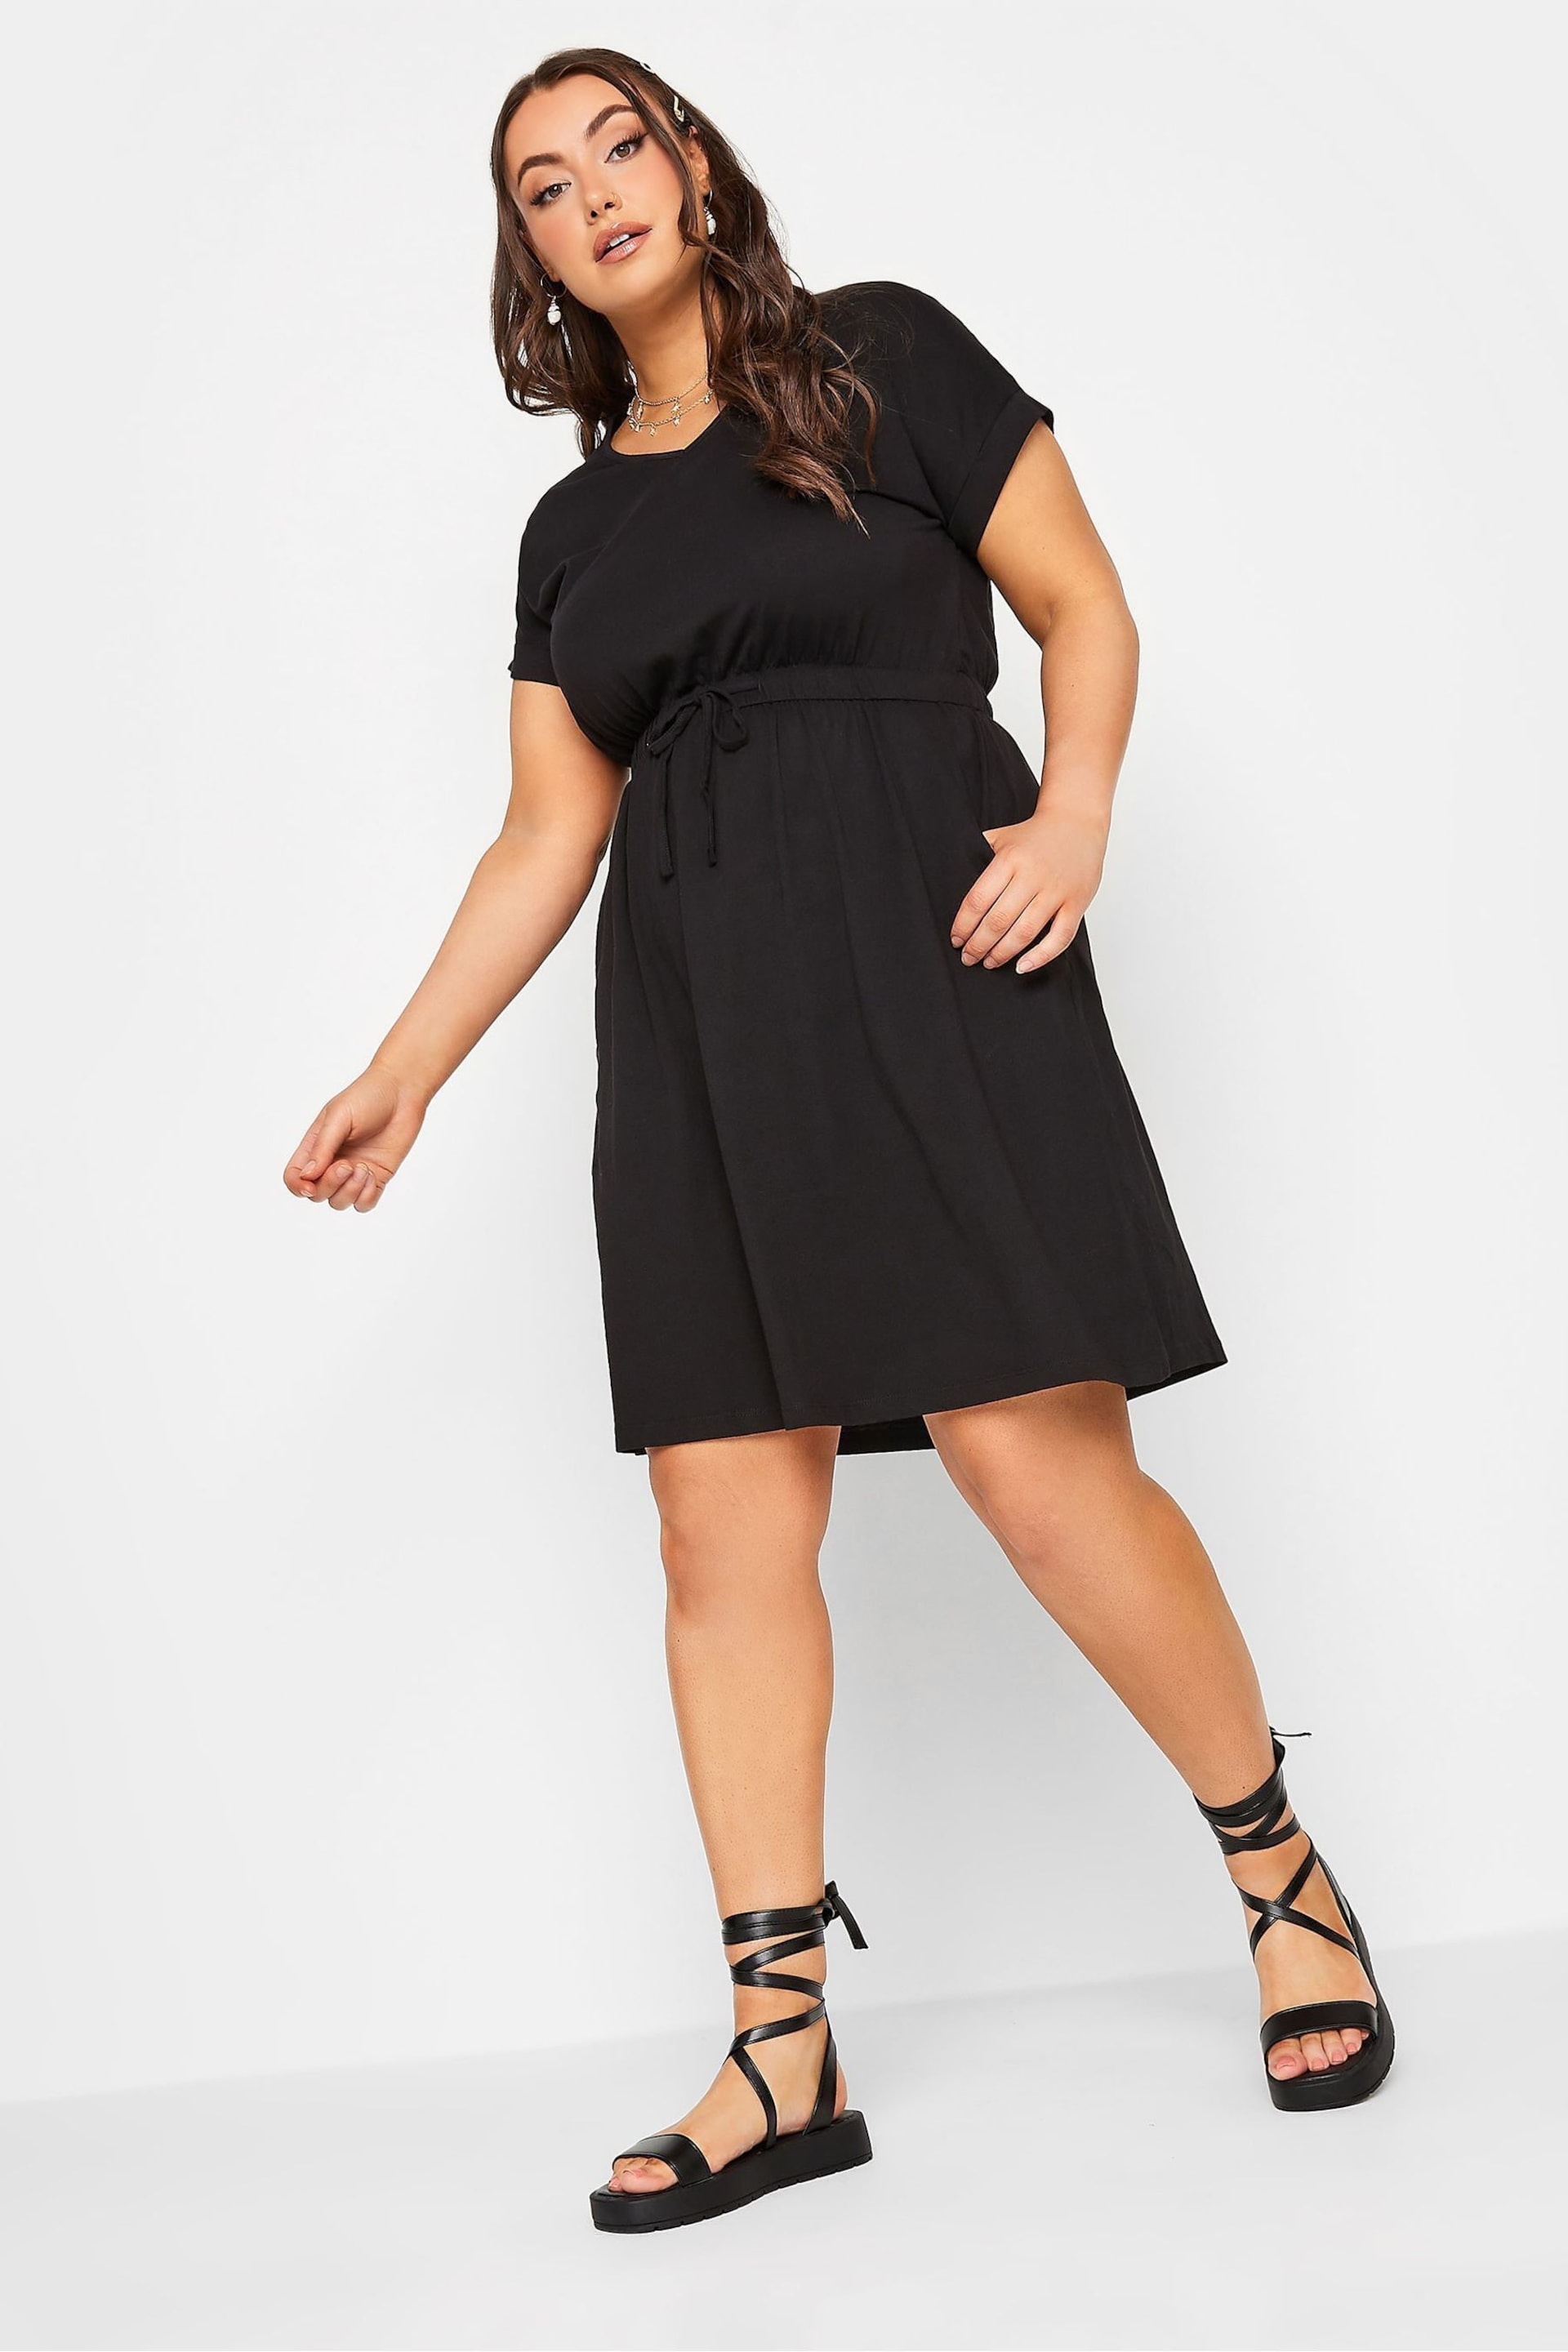 Yours Curve Black T-Shirt Drawcord Dress - Image 1 of 1